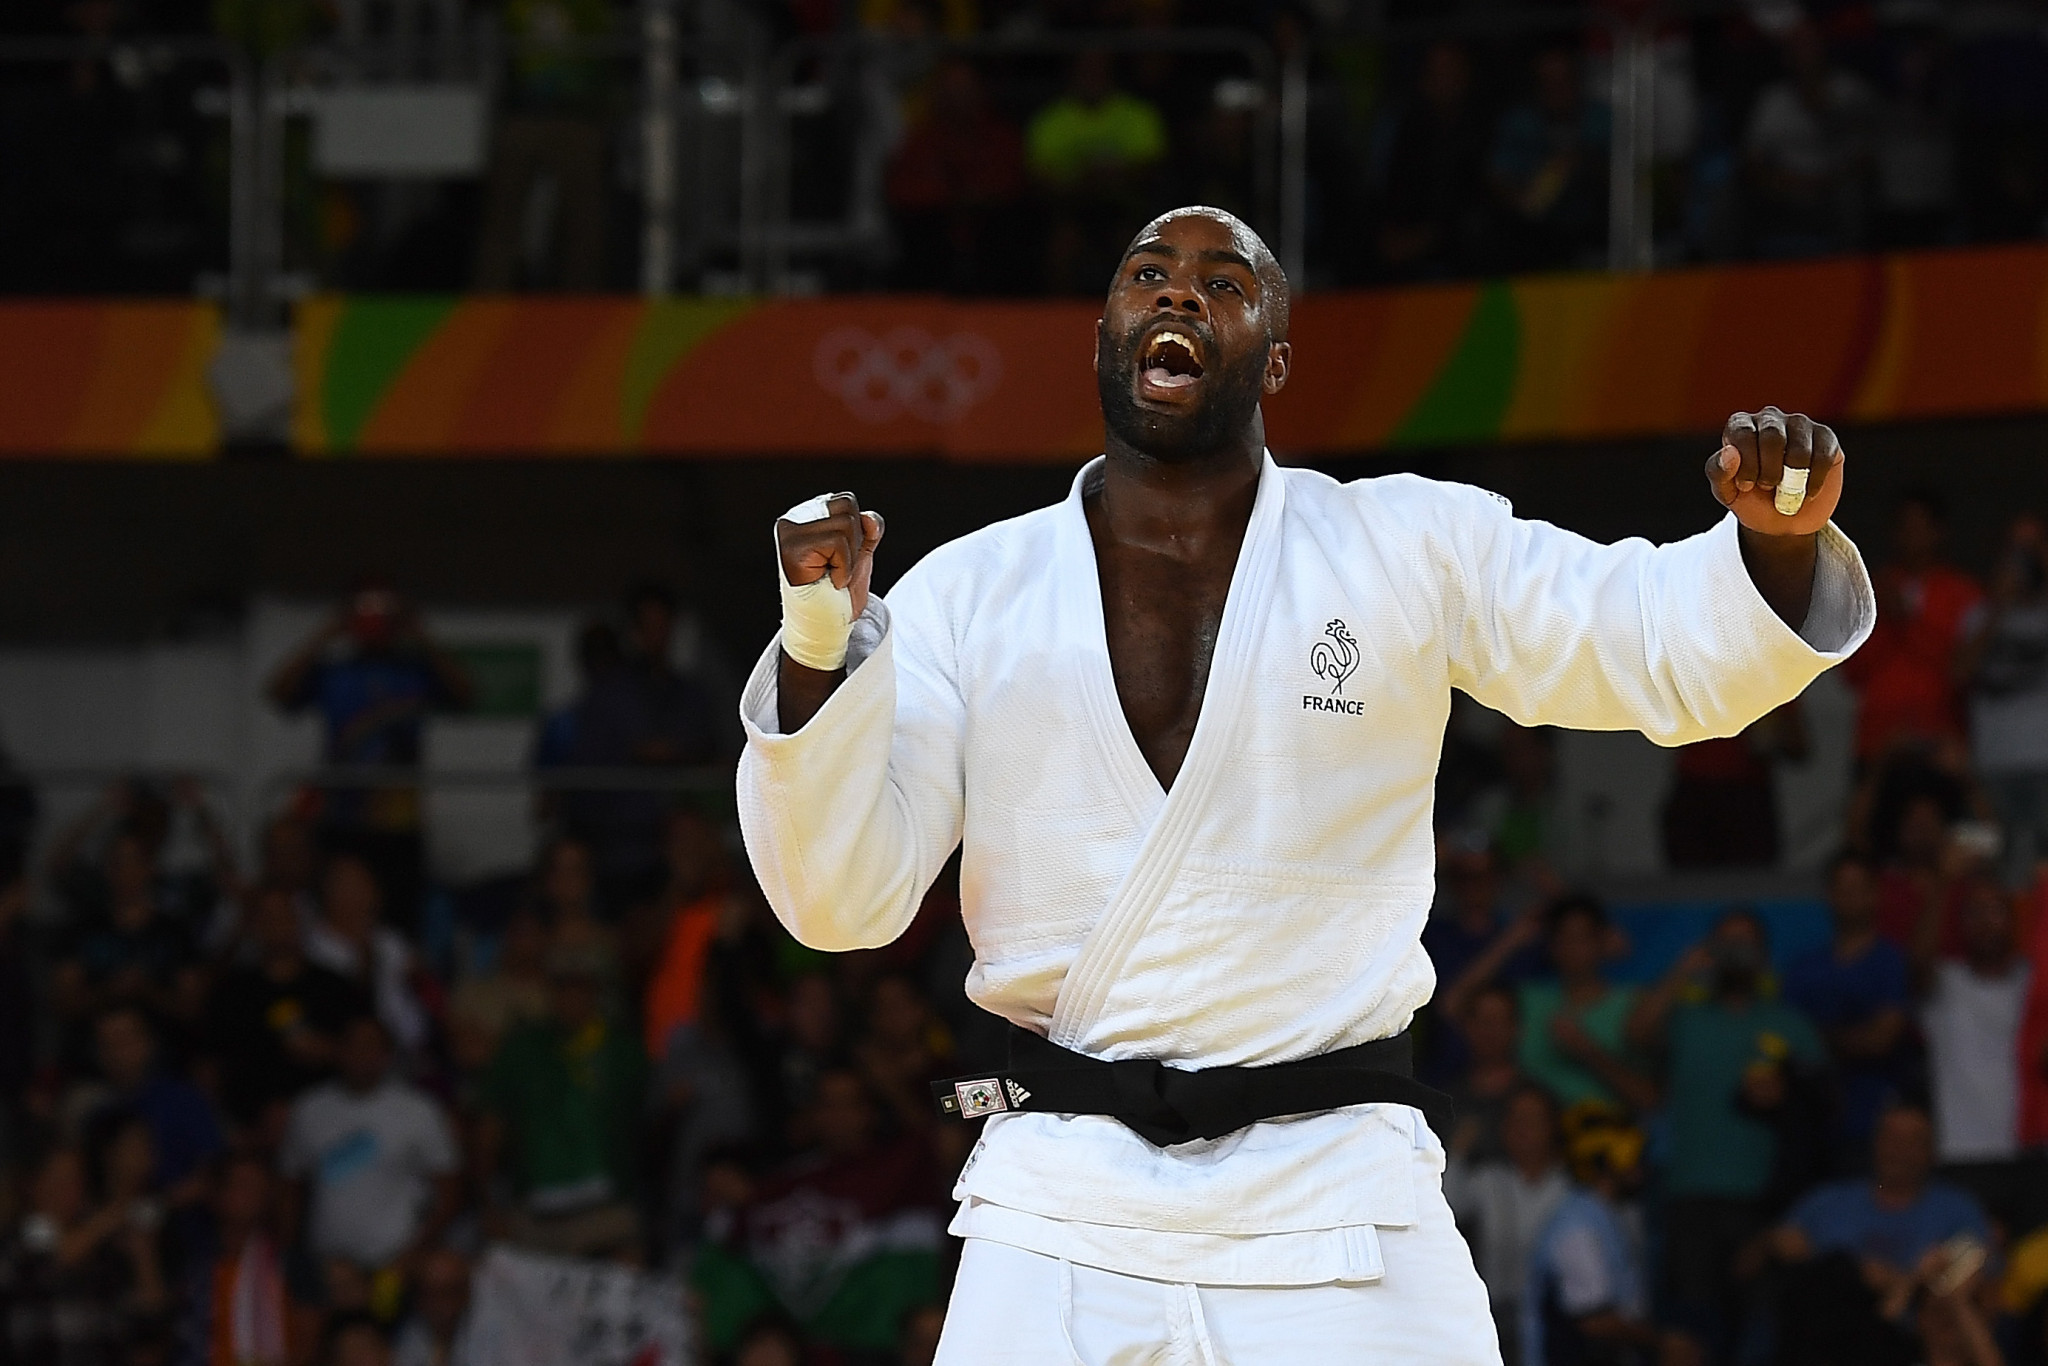 Two-time Olympic champion Riner headlines IJF World Judo Masters in Doha